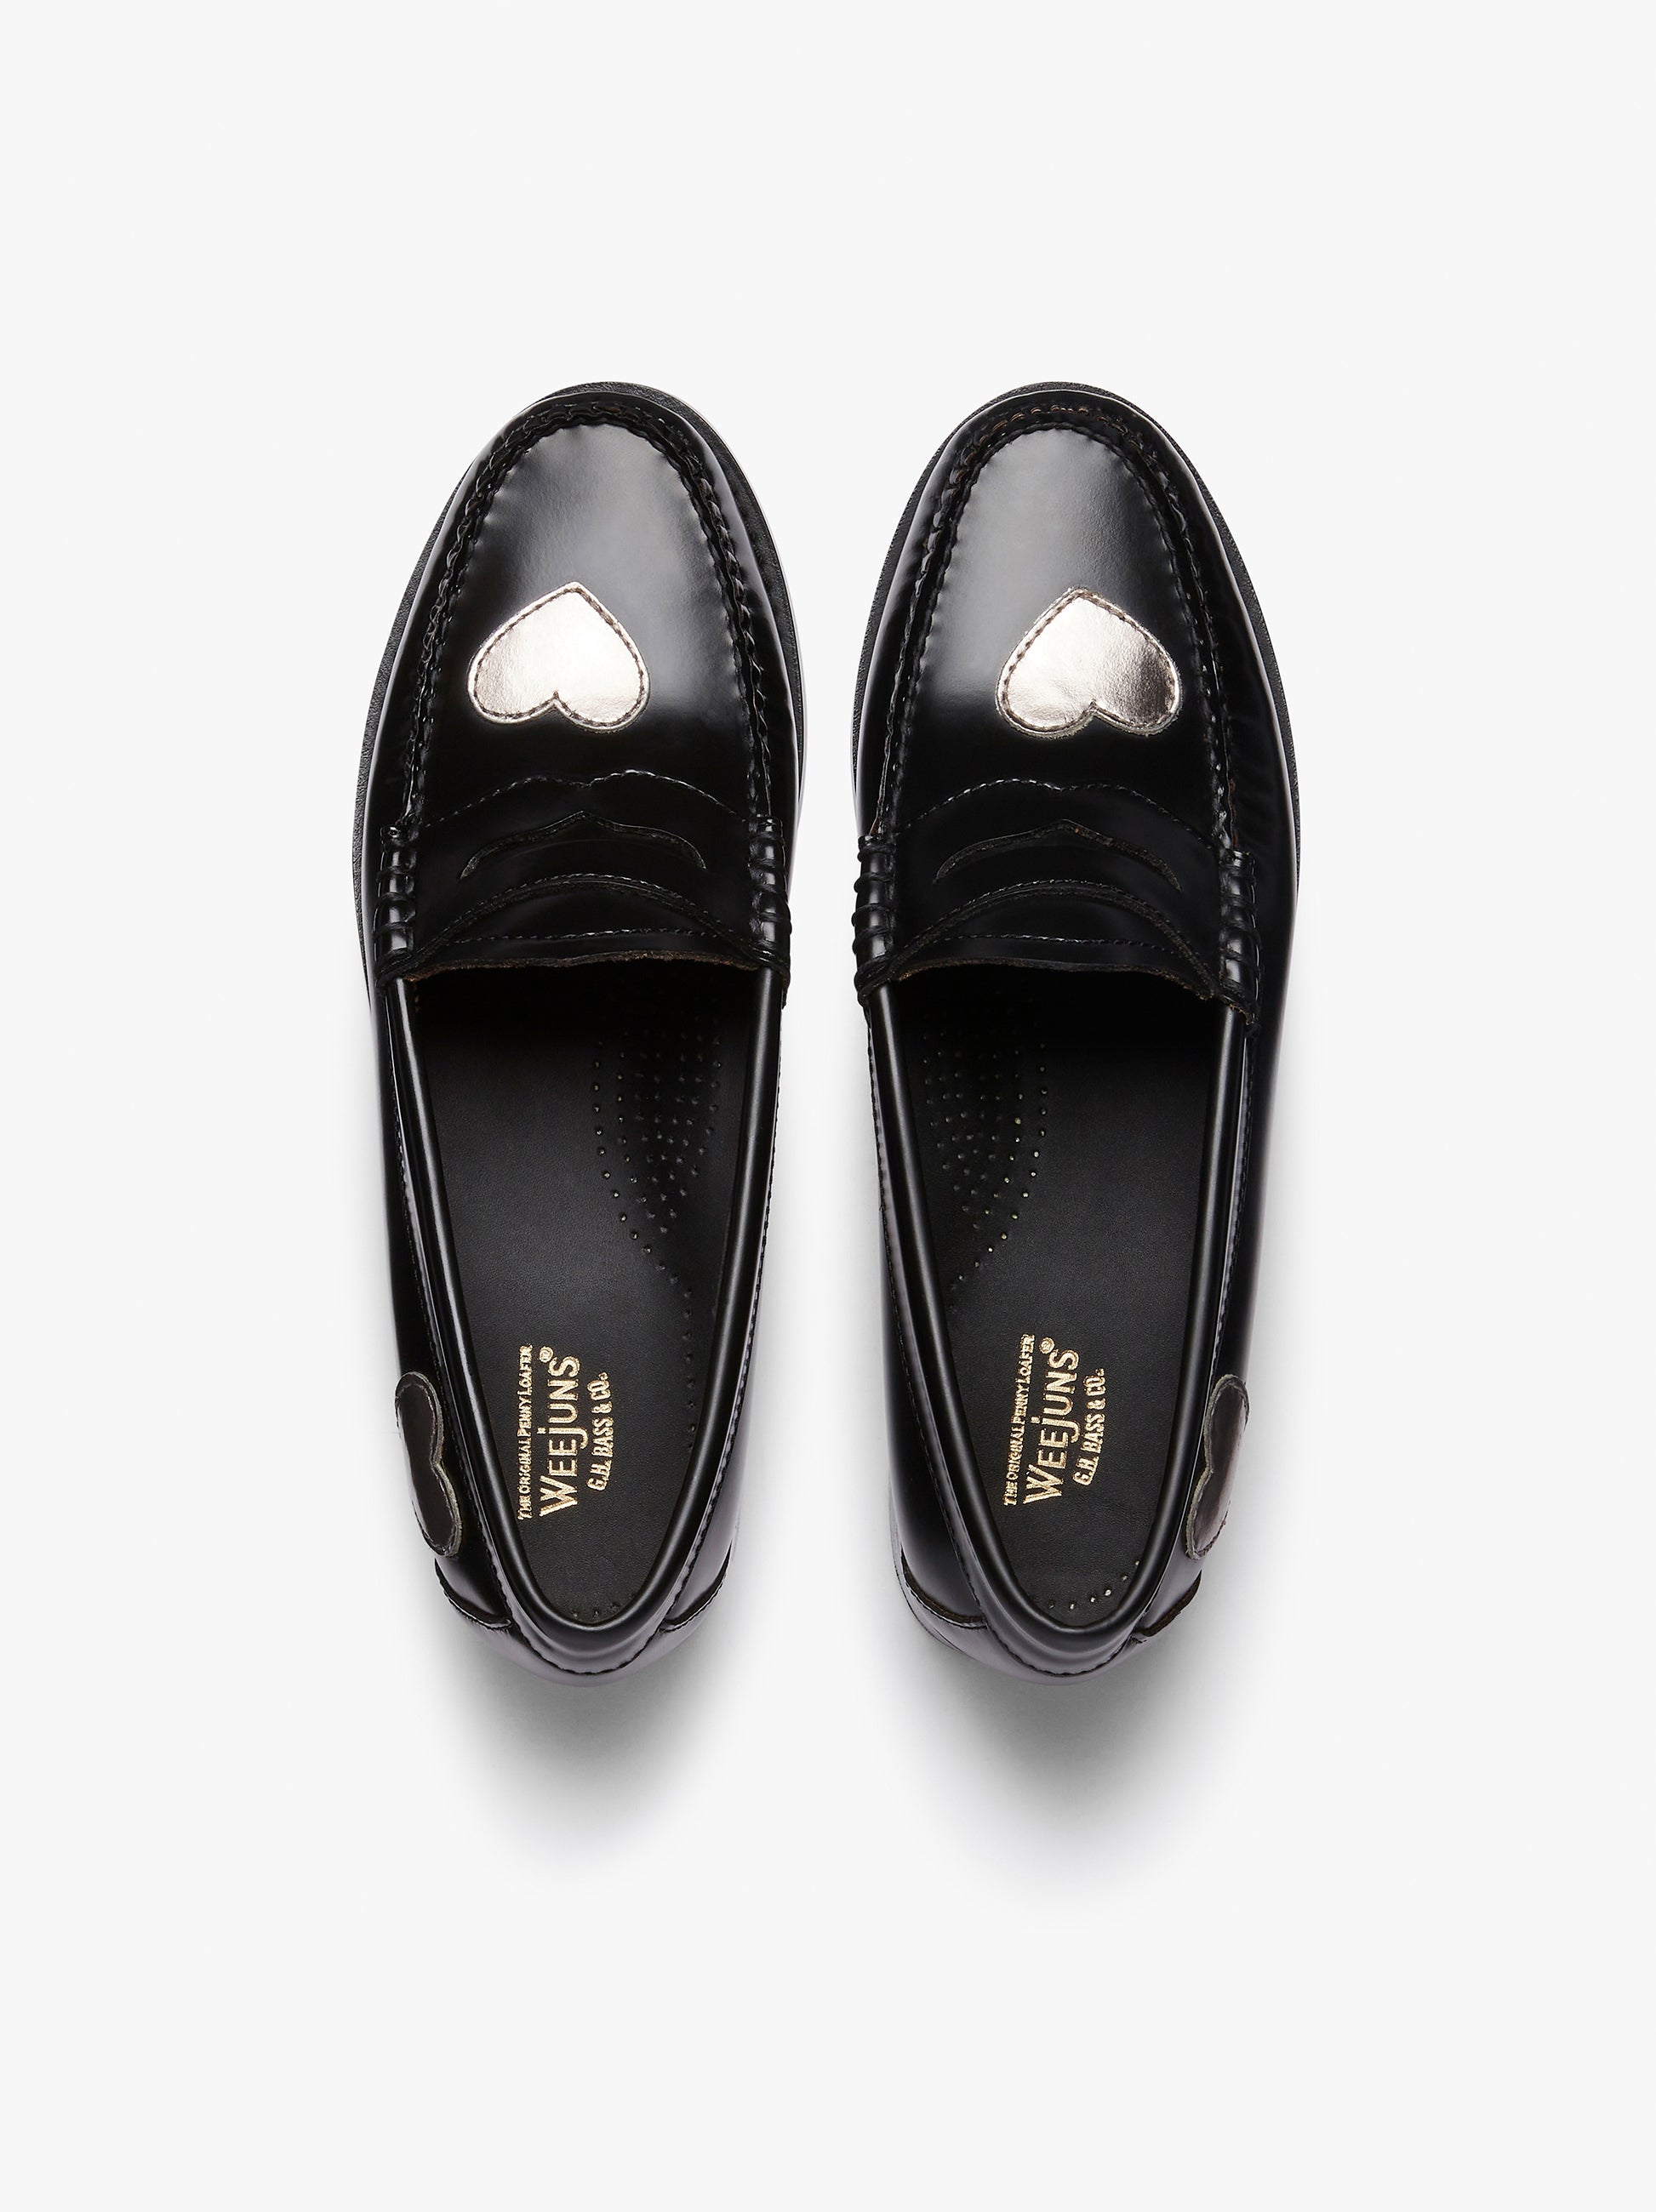 Weejuns Heart Loafers | Black Loafers With Silver Buckle – G.H.